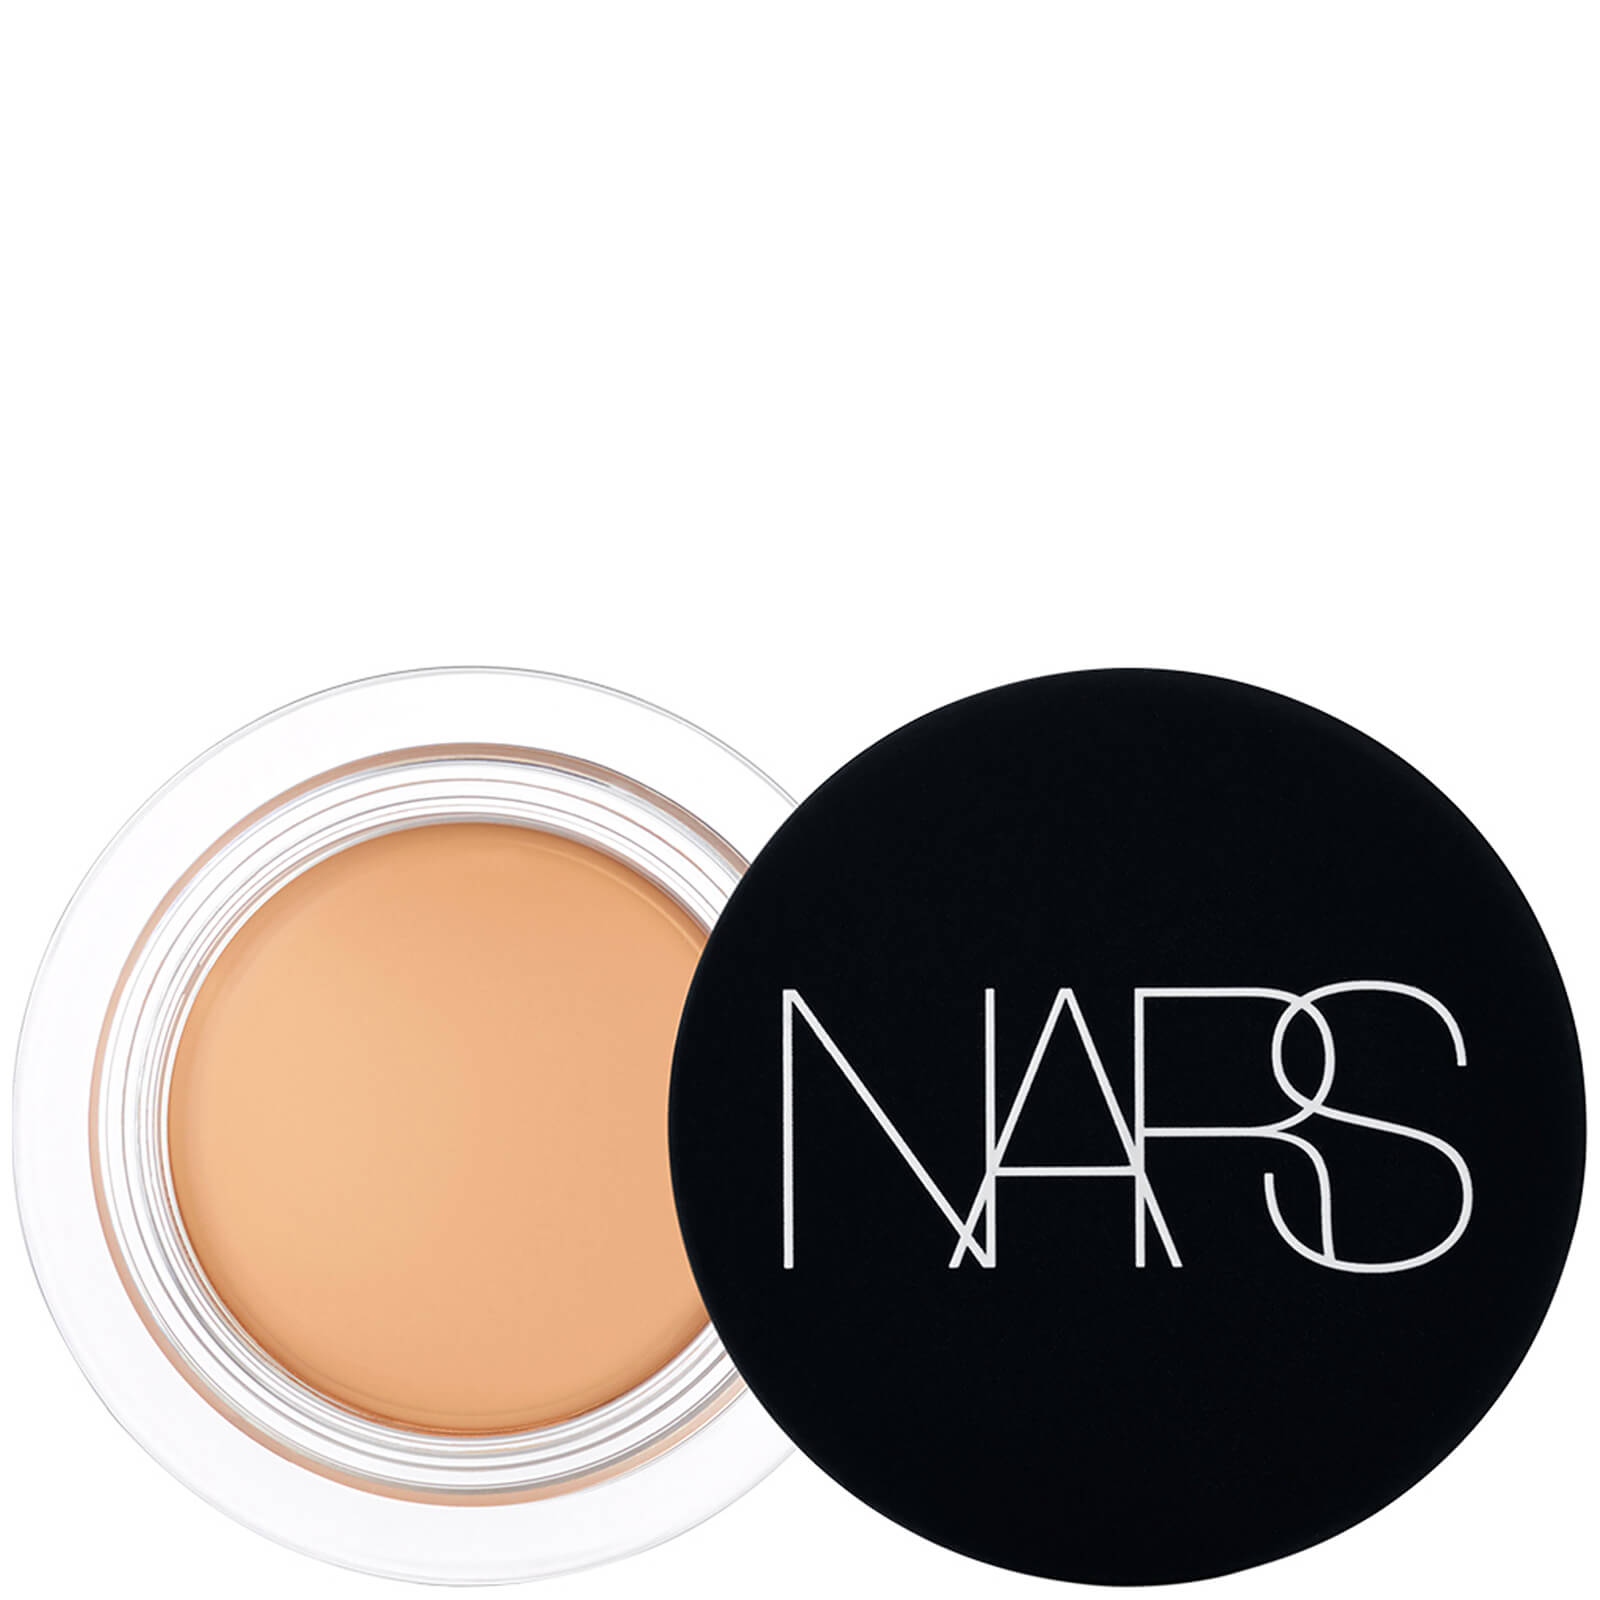 NARS Cosmetics Soft Matte Complete Concealer 5g (Various Shades) - Macadamia